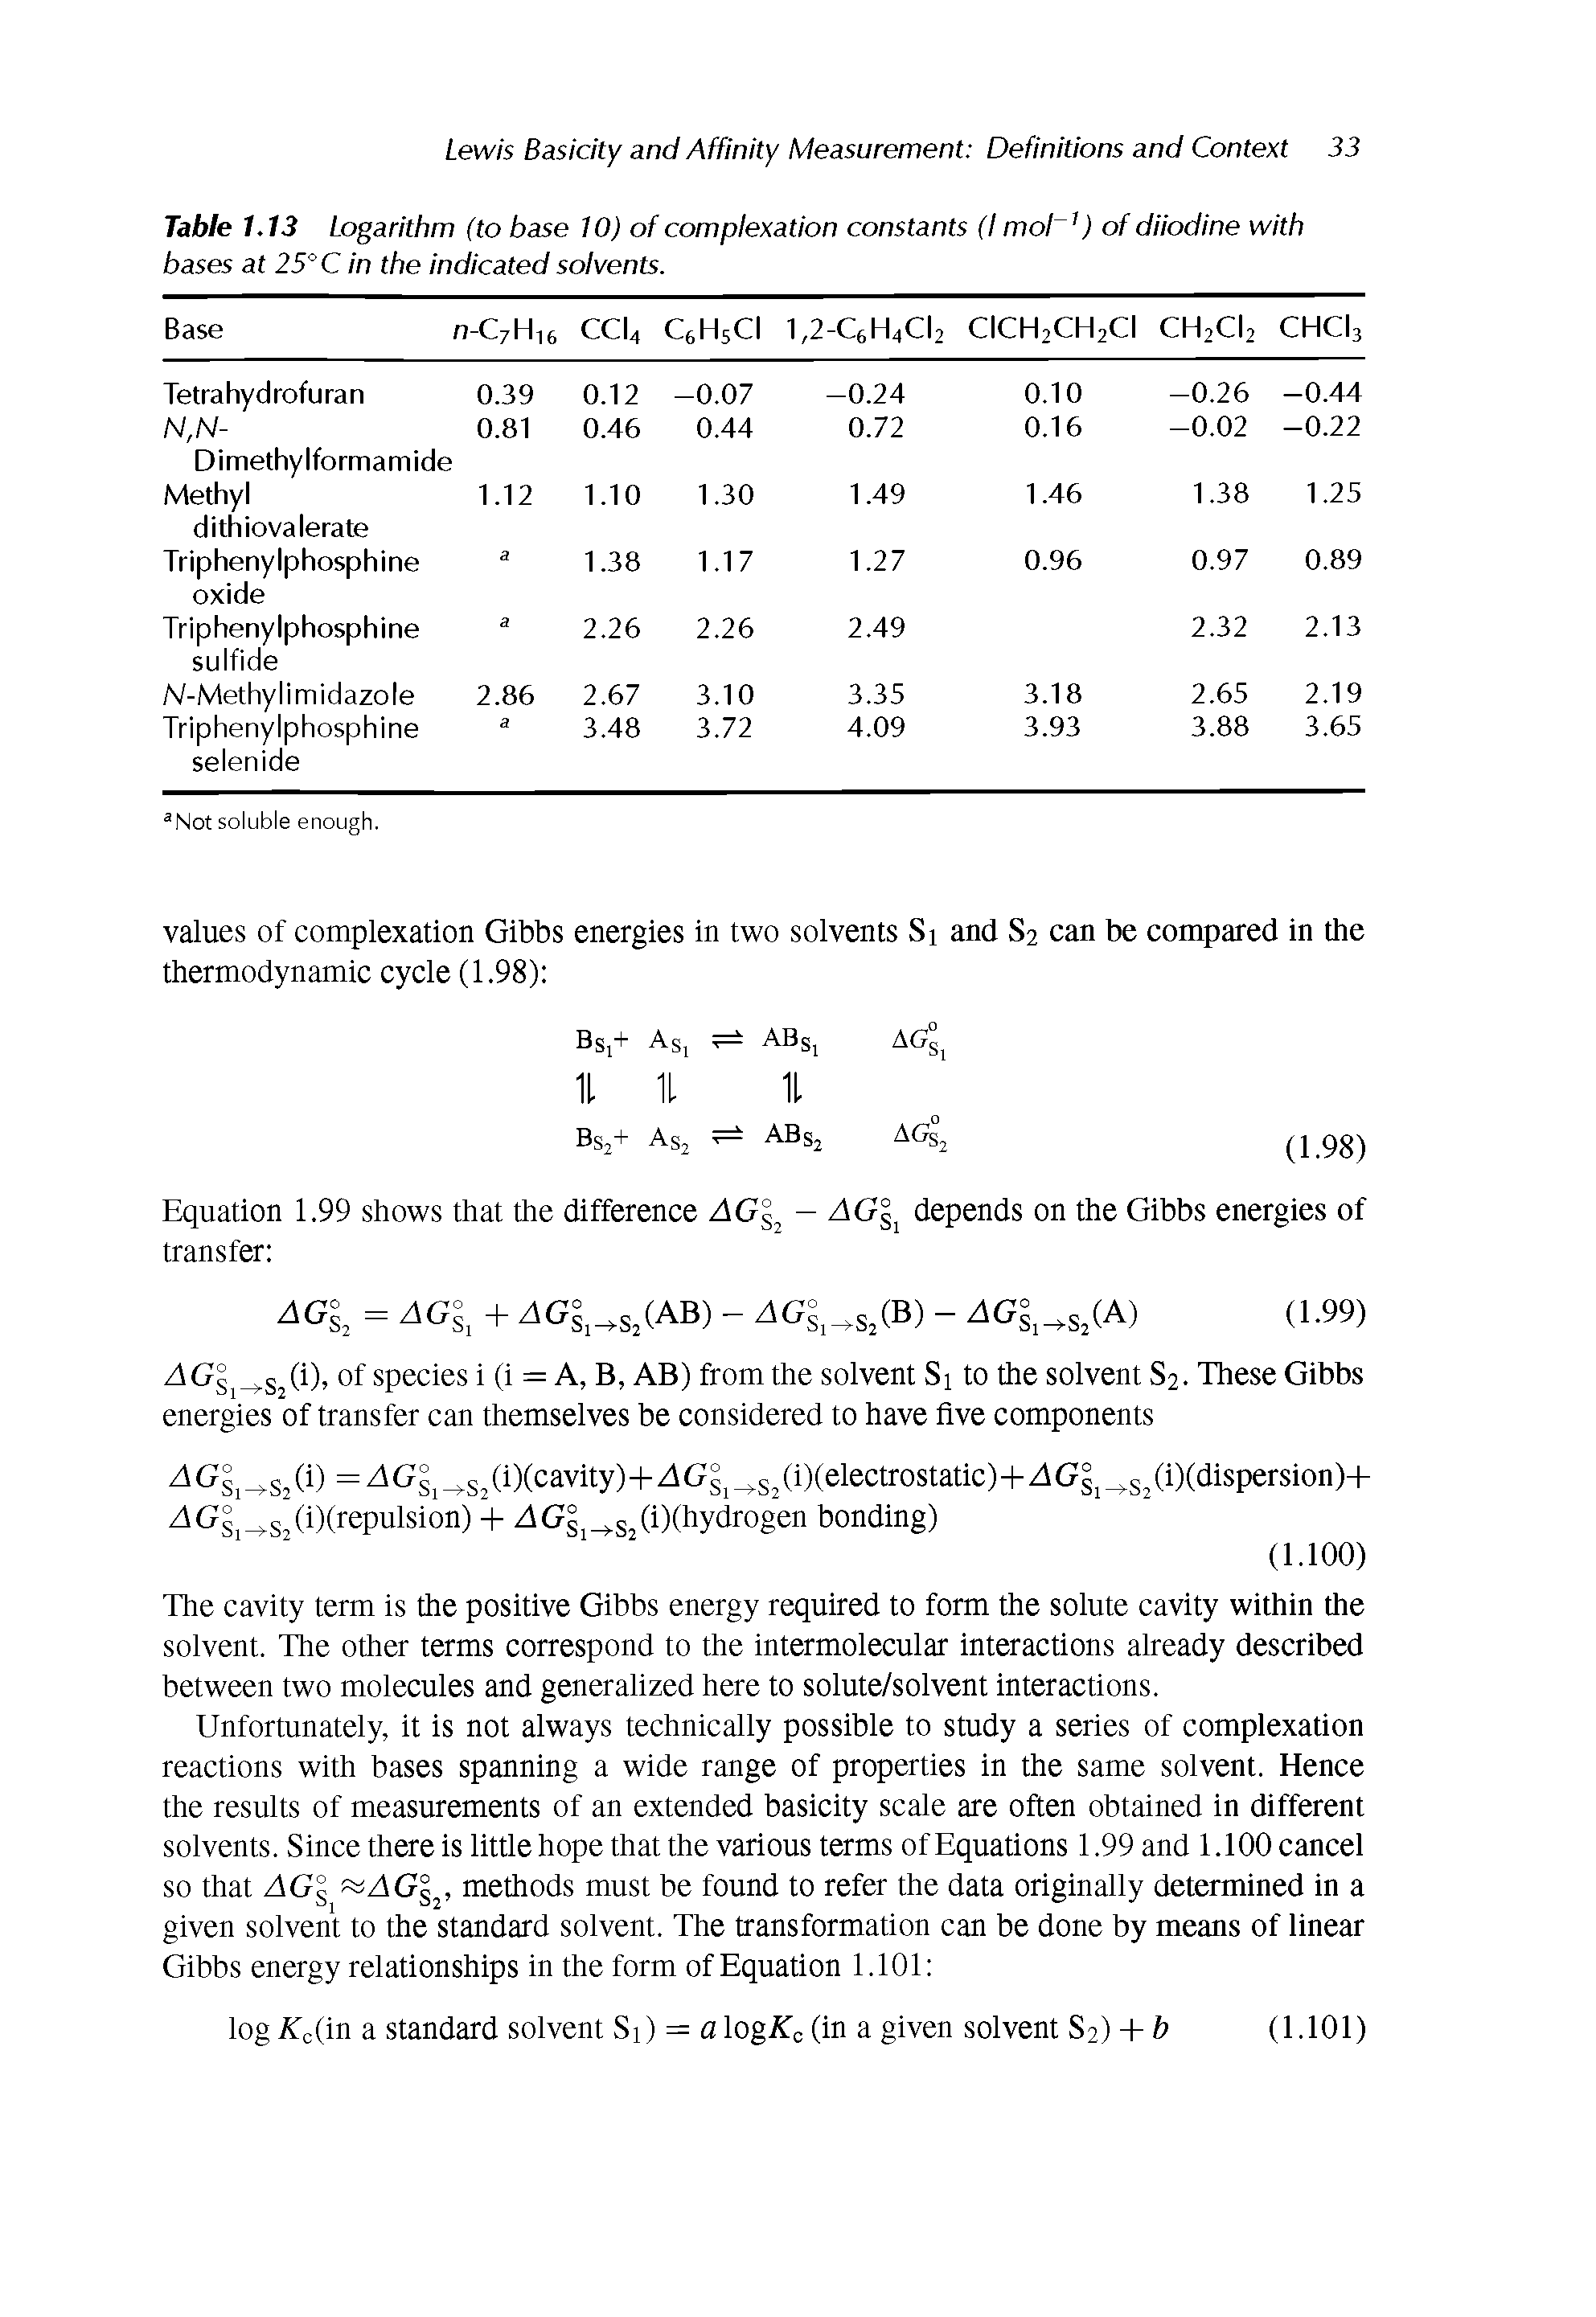 Table 1.13 Logarithm (to base 10) of complexation constants (I mol ) of diiodine with bases at 25° C in the indicated solvents.